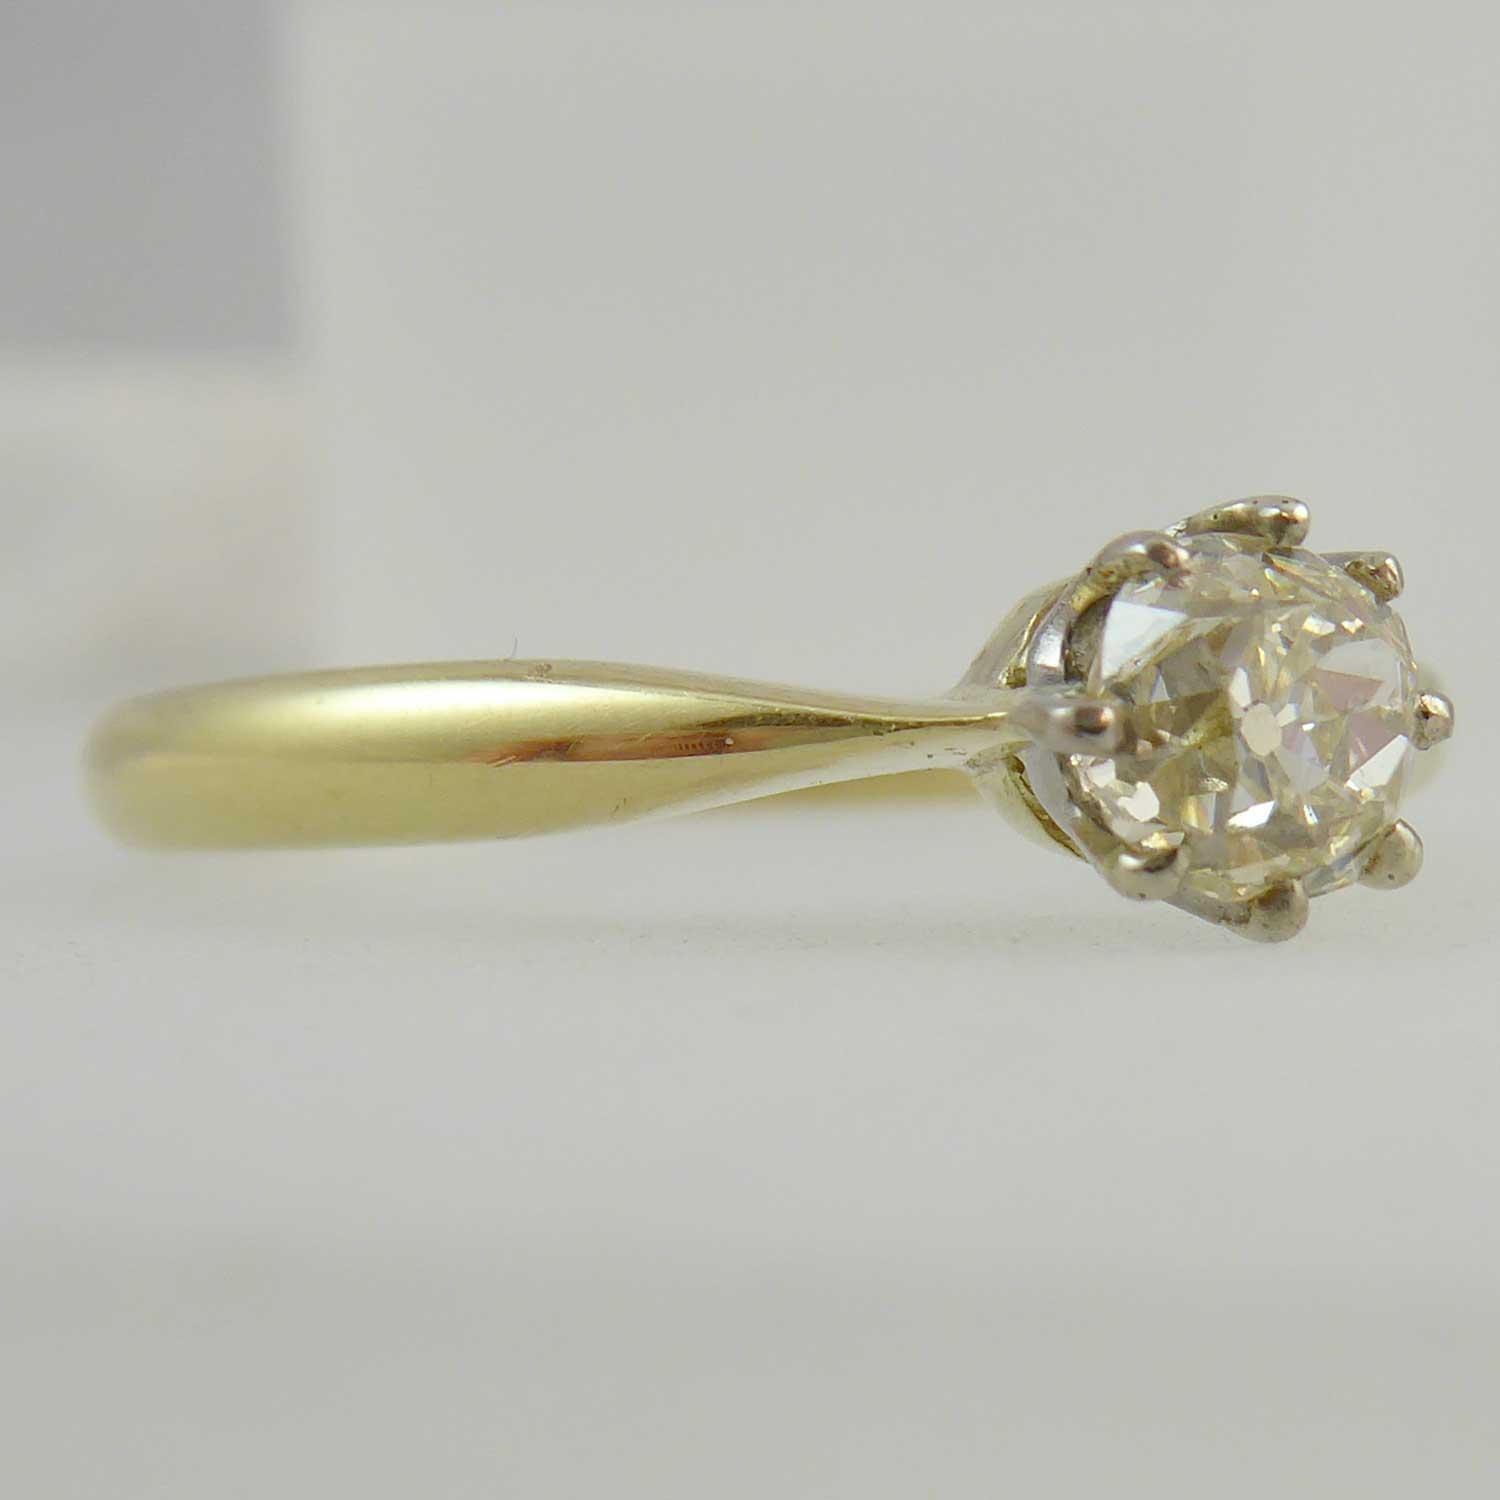 A delightful vintage solitaire ring perfect for the petite hand.  Set with an old brilliant cut diamond in a white claw setting and with a known weight of 0.65ct.  Clarity is assessed as VS and colour tinted.  Plain polished yellow band stamped 18ct